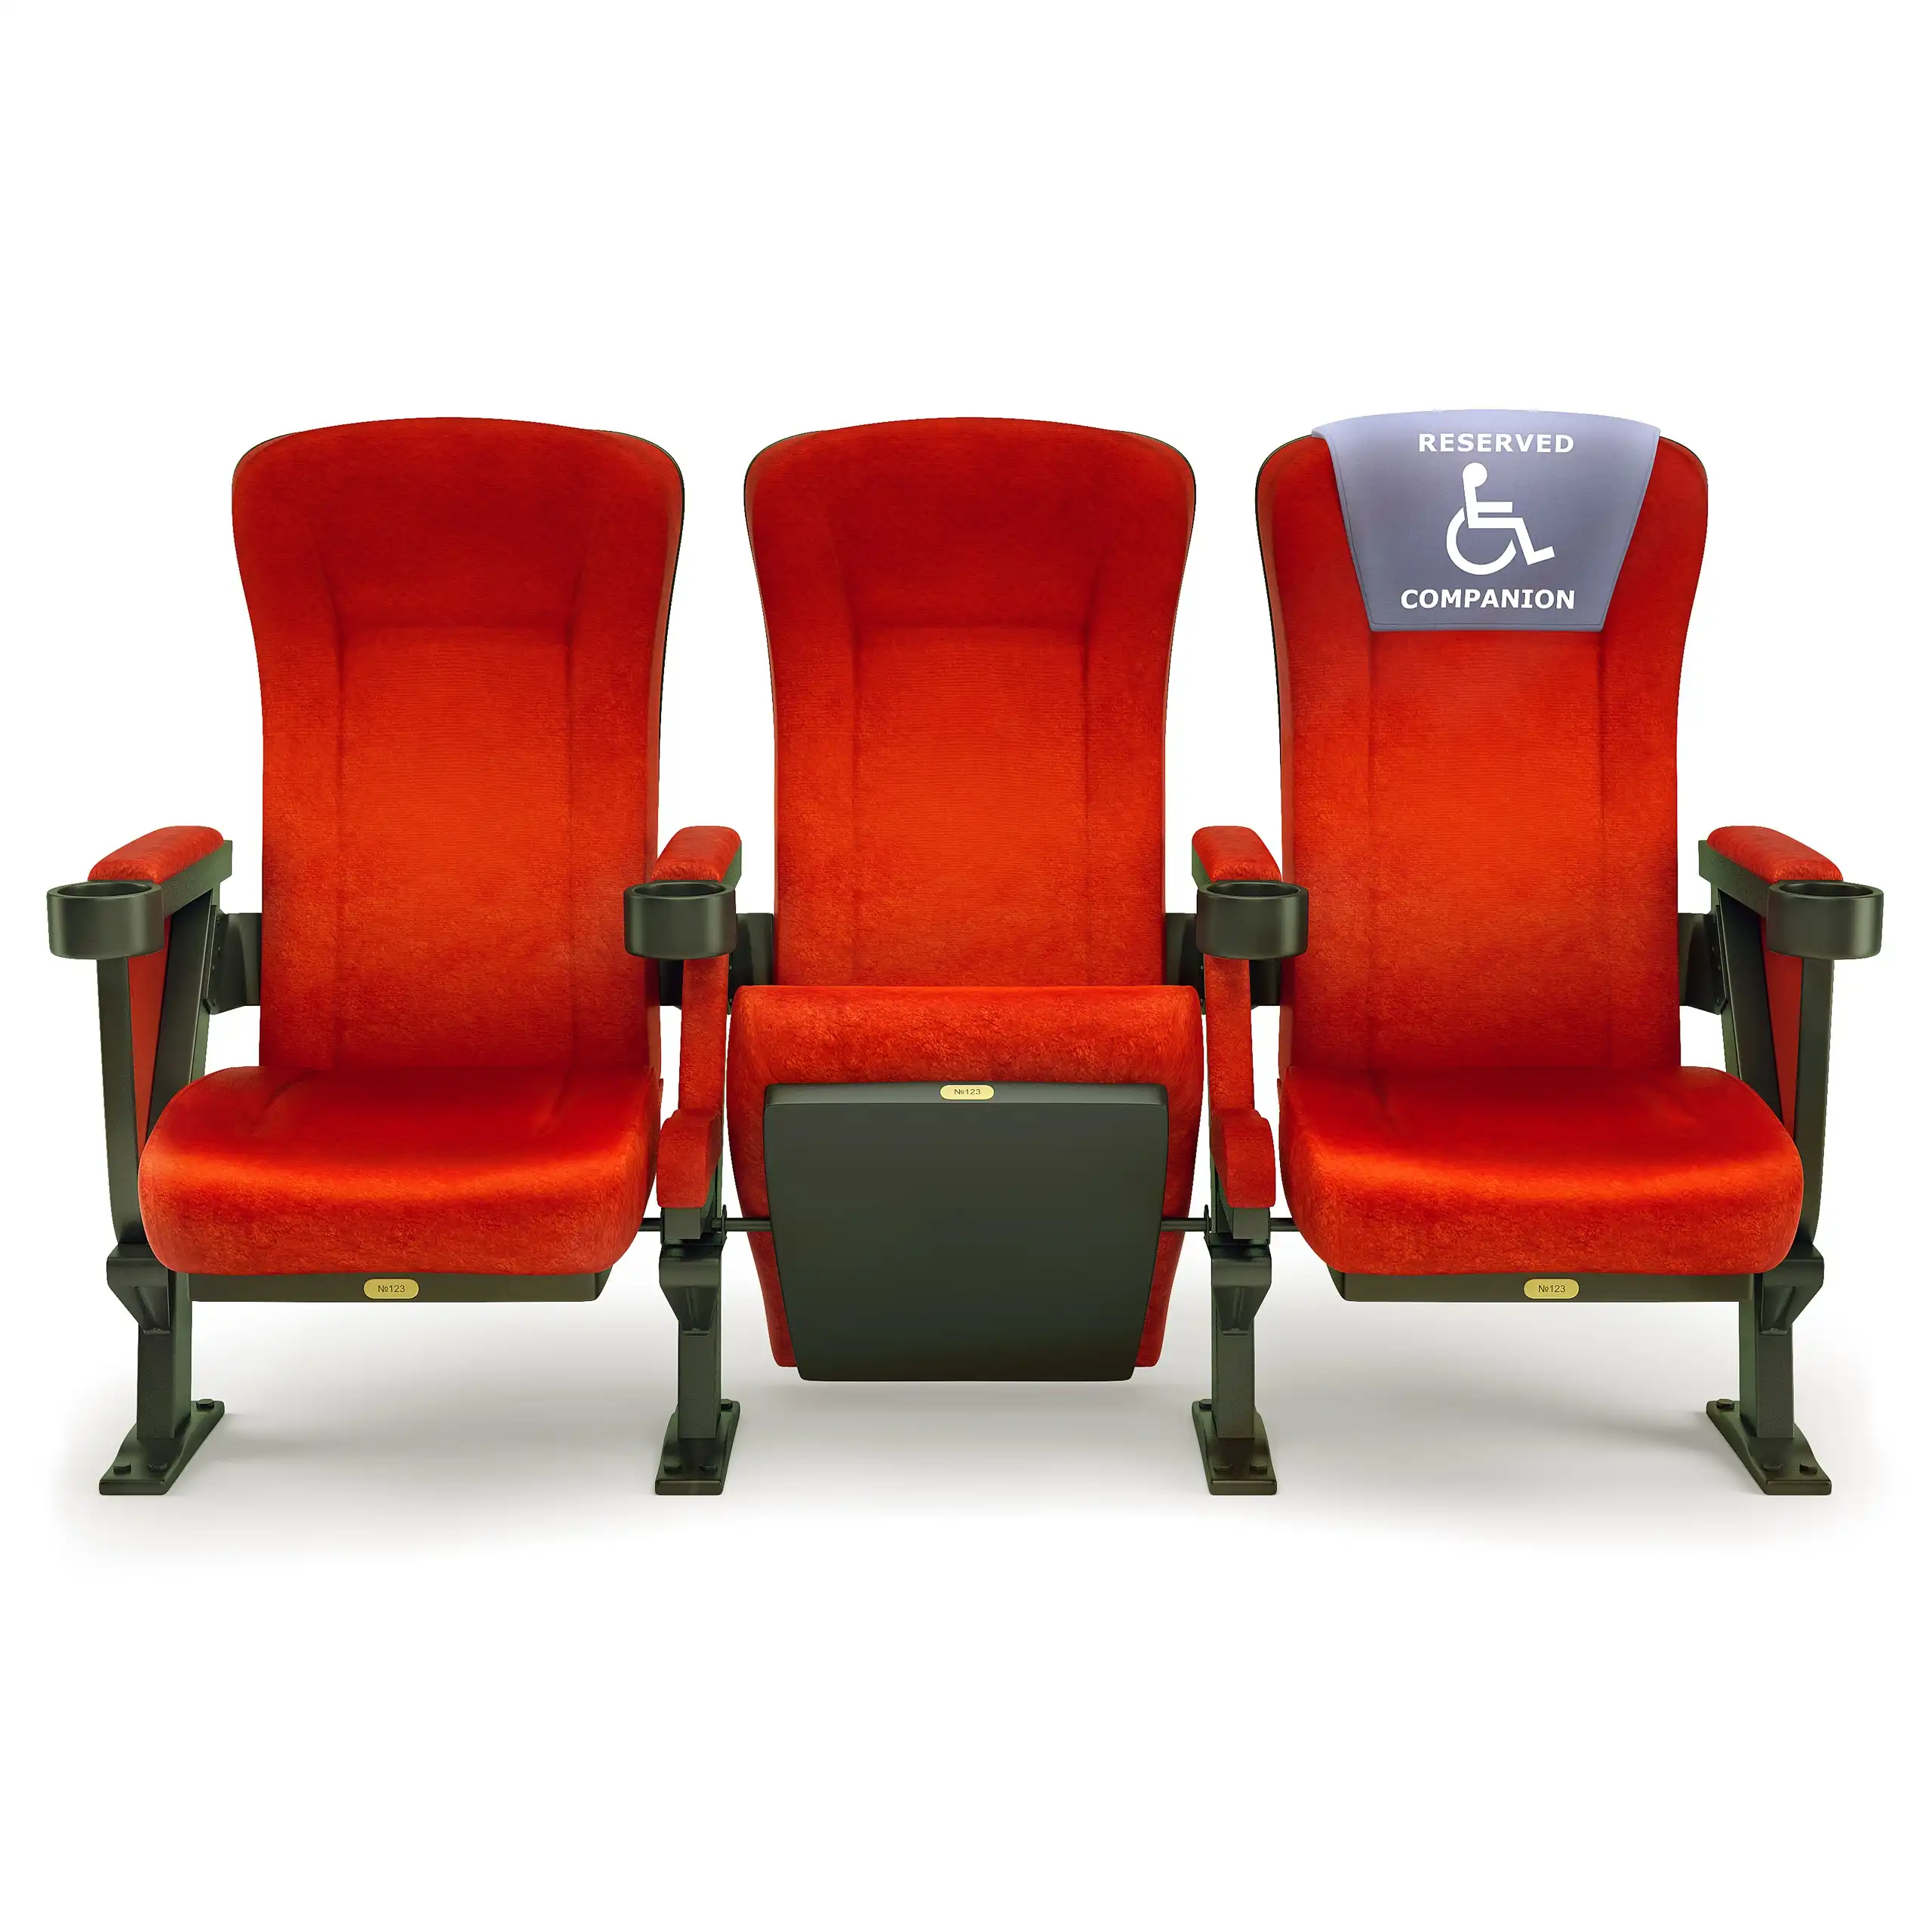 Red Cinema Chair 3D Model